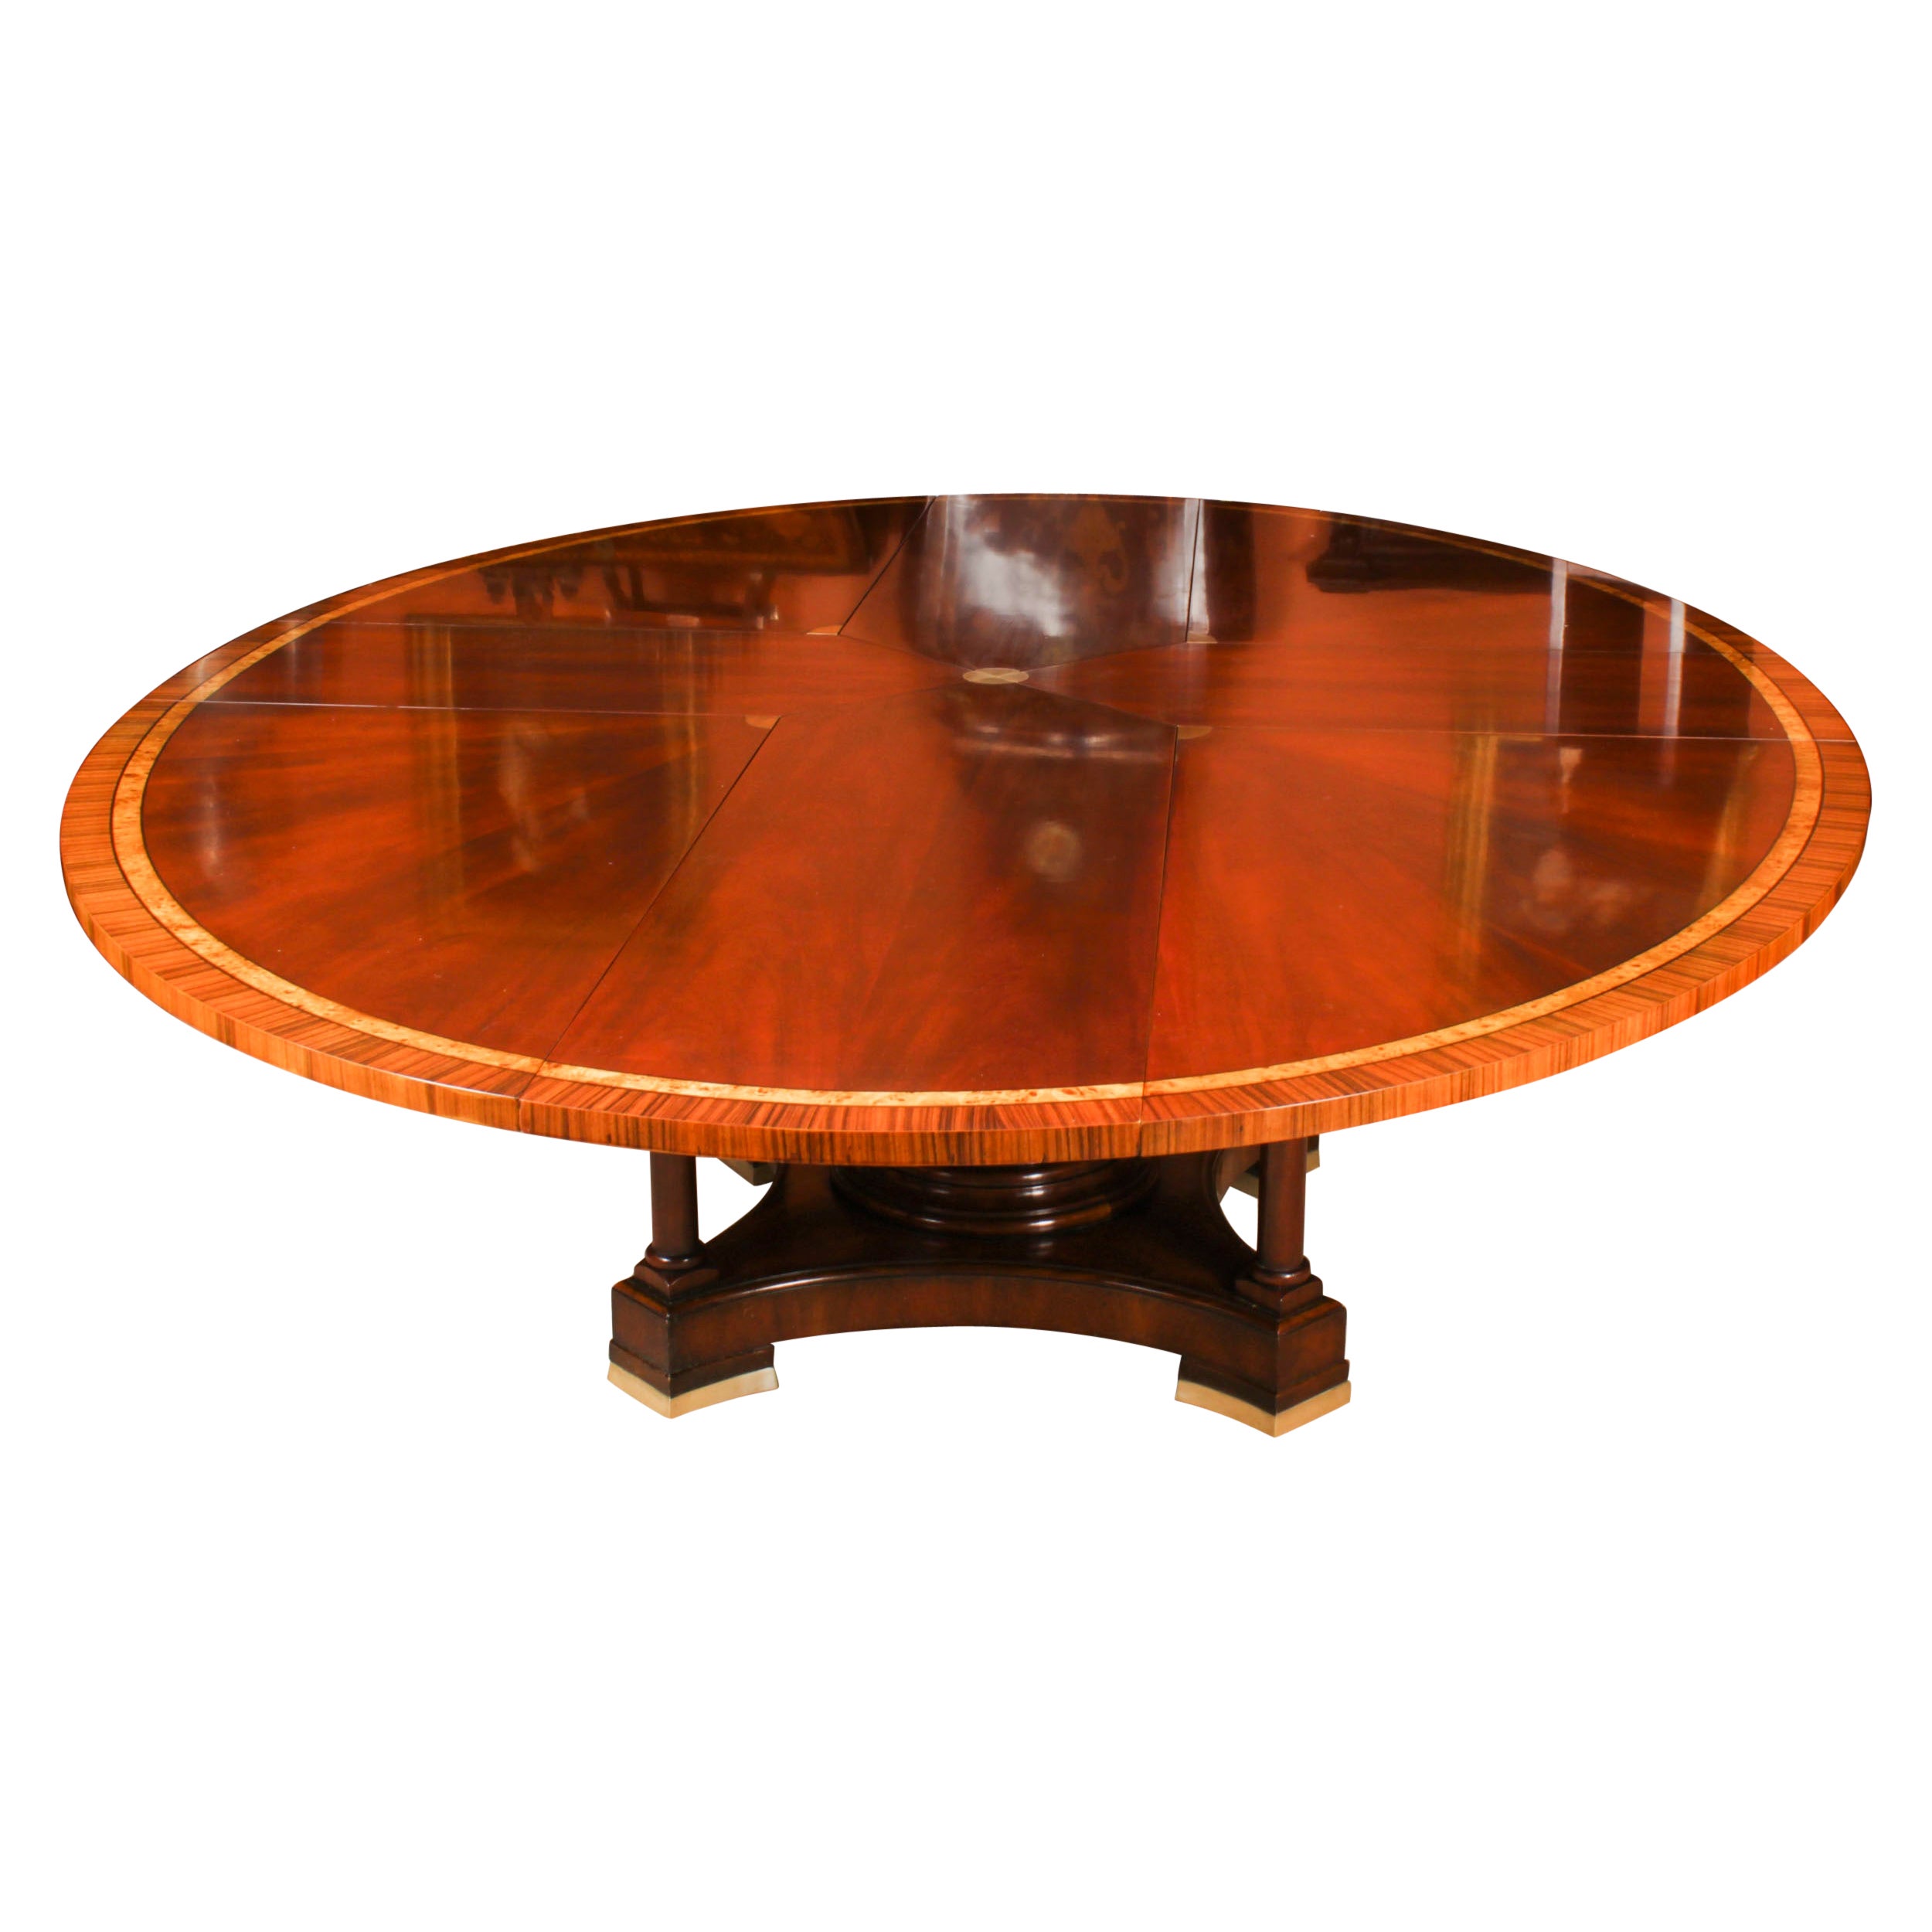 Vintage Large 9ft x 6ft3" Oval Flame Mahogany Jupe Dining Table 20th Century For Sale